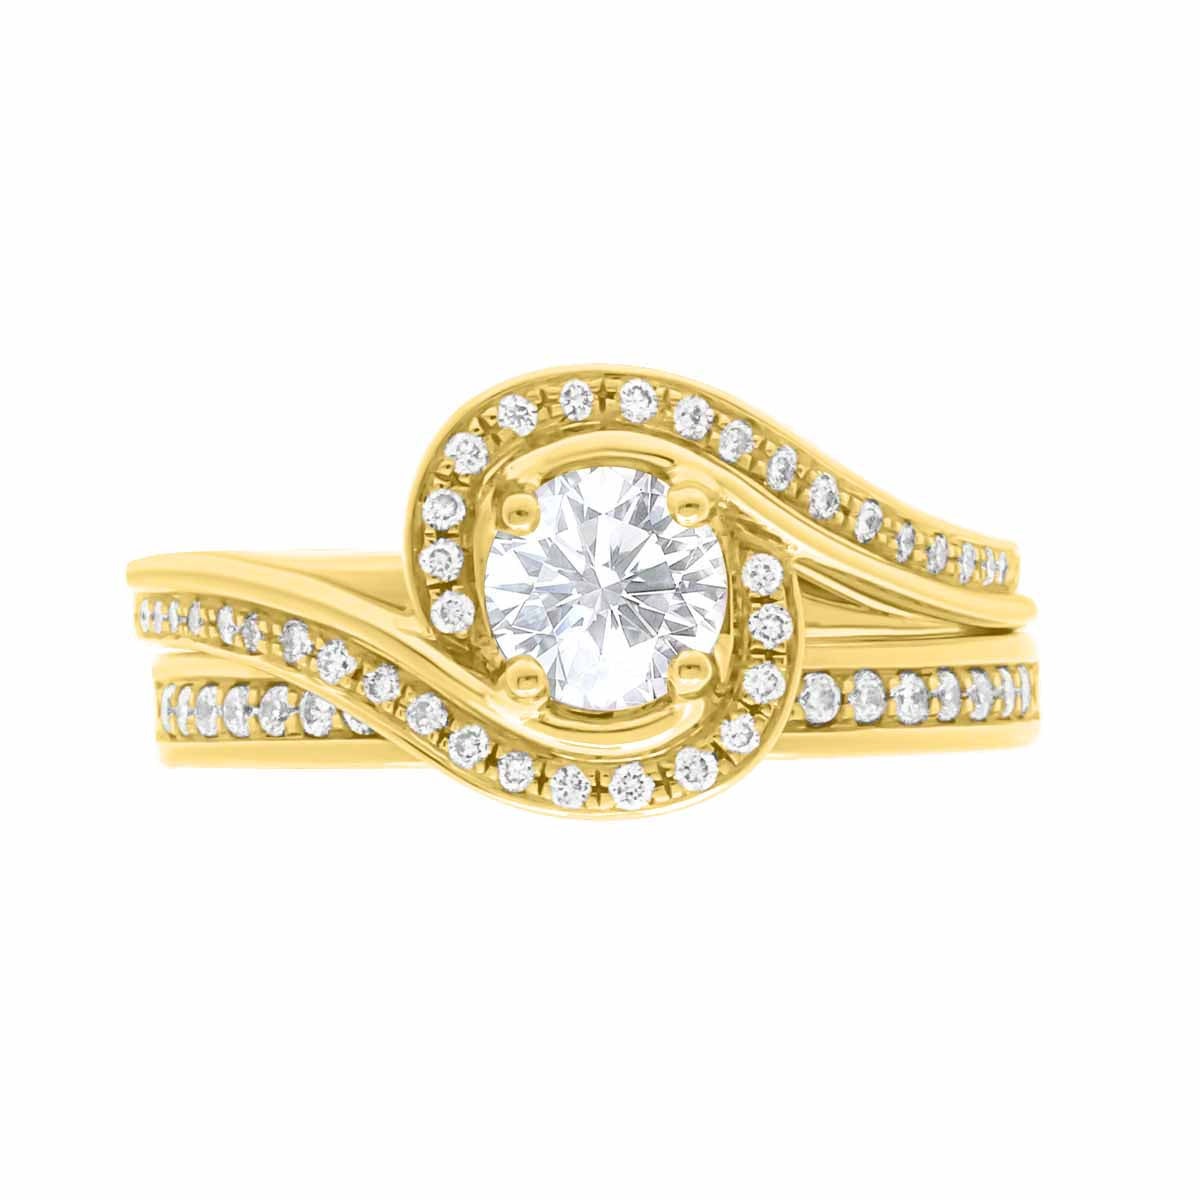 Contemporary Style Engagement Ring in yellow gold, lying flat, with a matching diamond set wedding ring,  with a white background